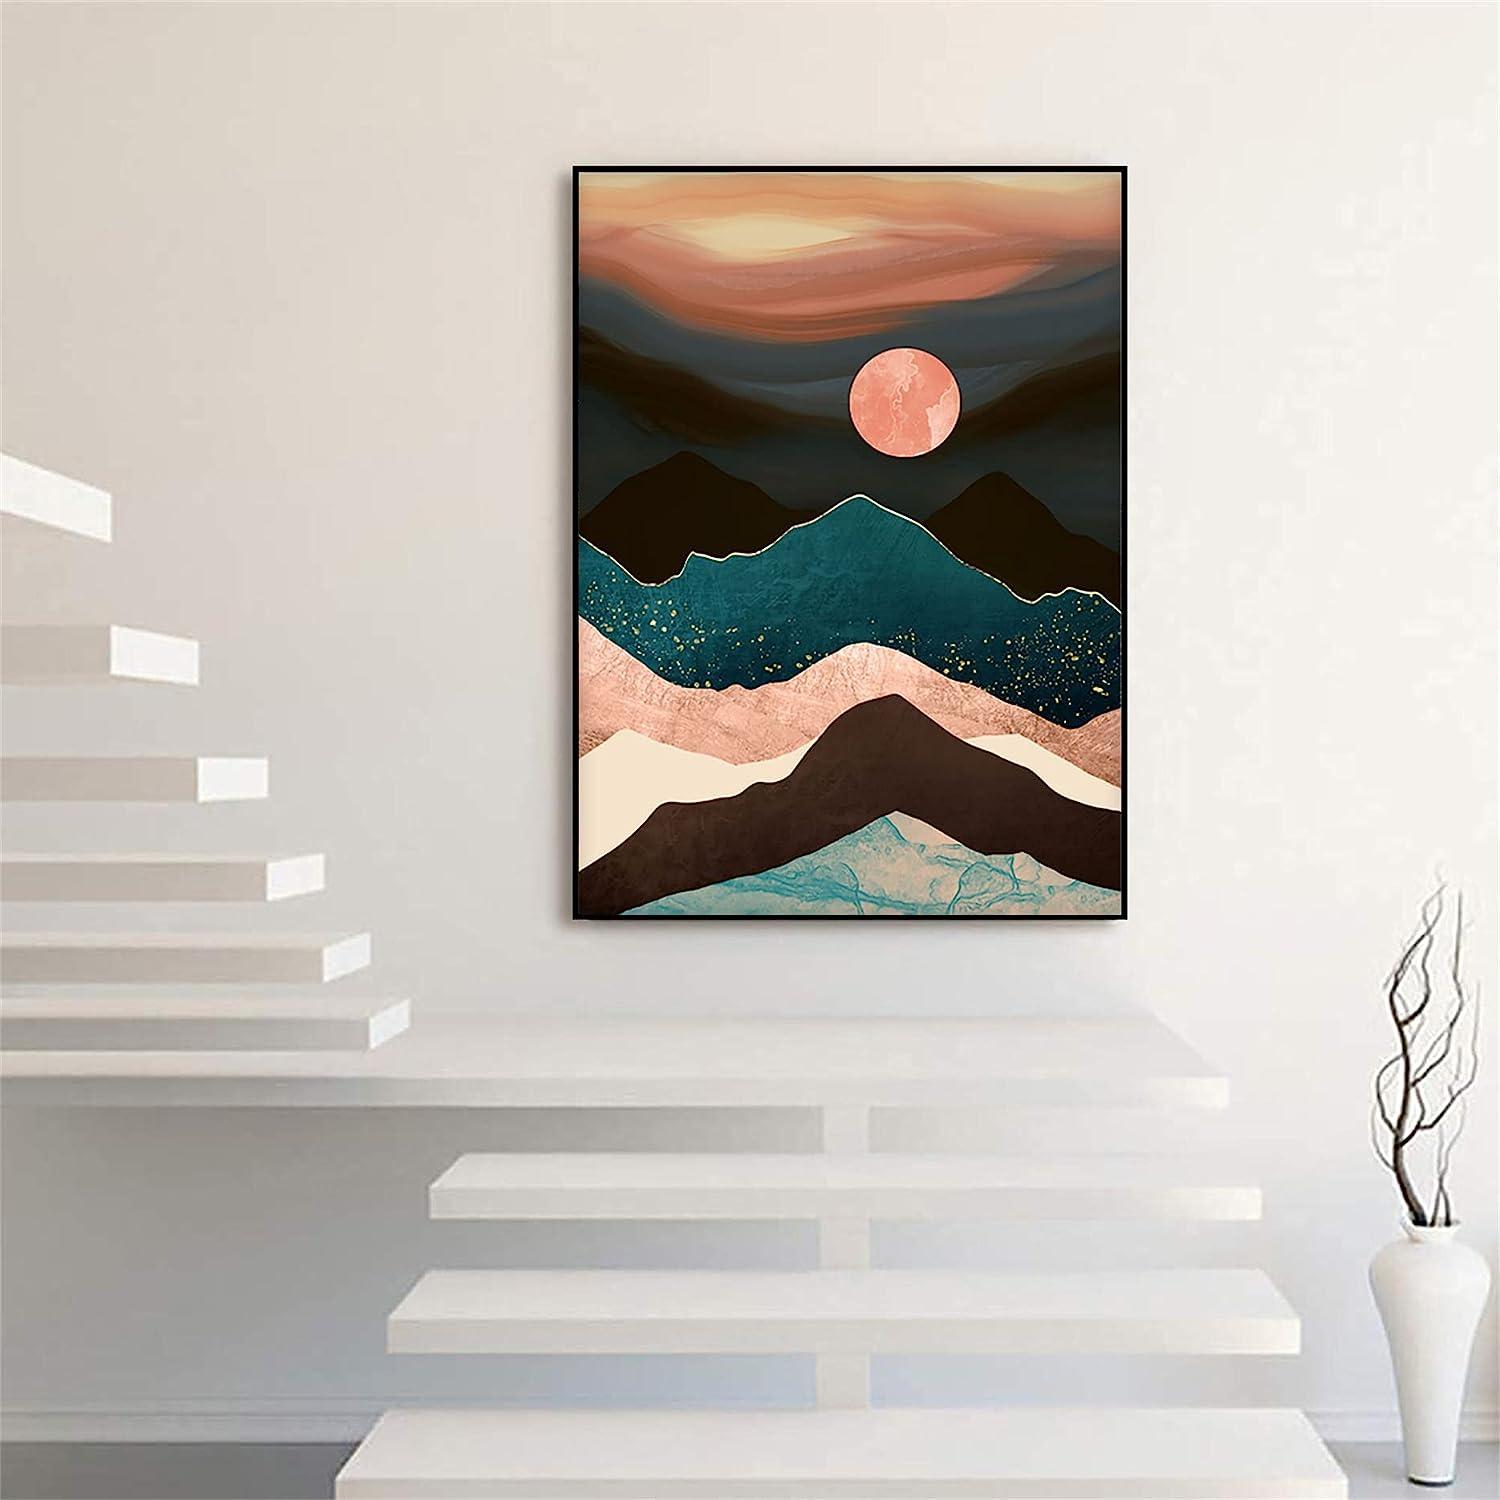 Hestarcul Diamond Painting Mountain Kit Diamond Art Kits for Adults  Abstract Scenery Paint with Diamonds Round for Gift Wall Decor(12x16)  (Mountain) Abstract-1